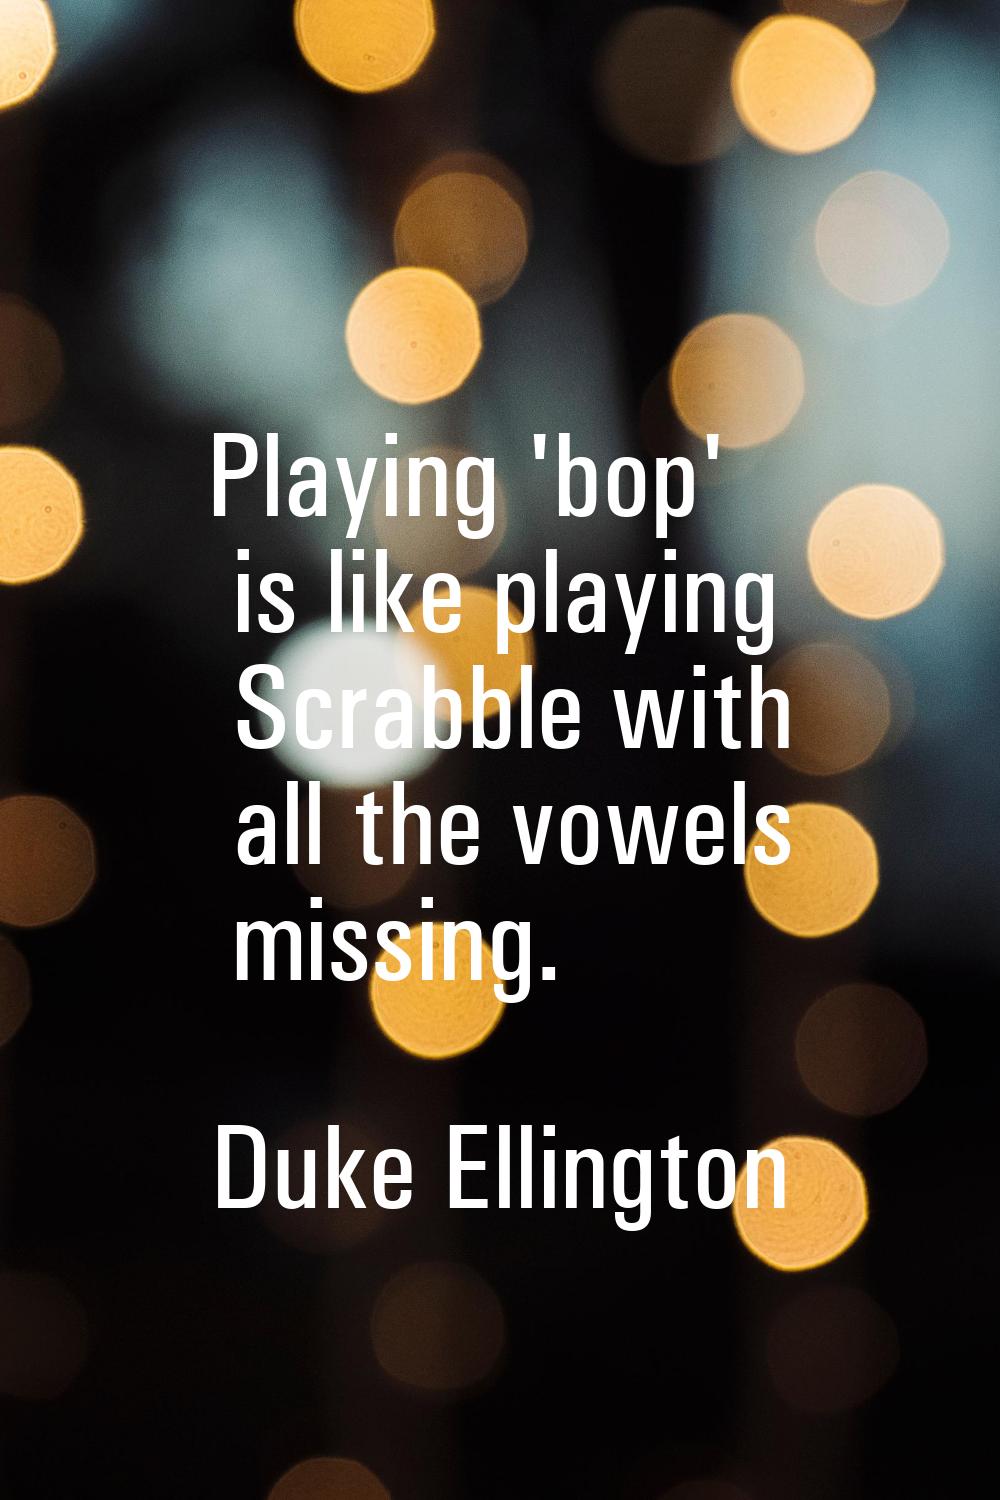 Playing 'bop' is like playing Scrabble with all the vowels missing.